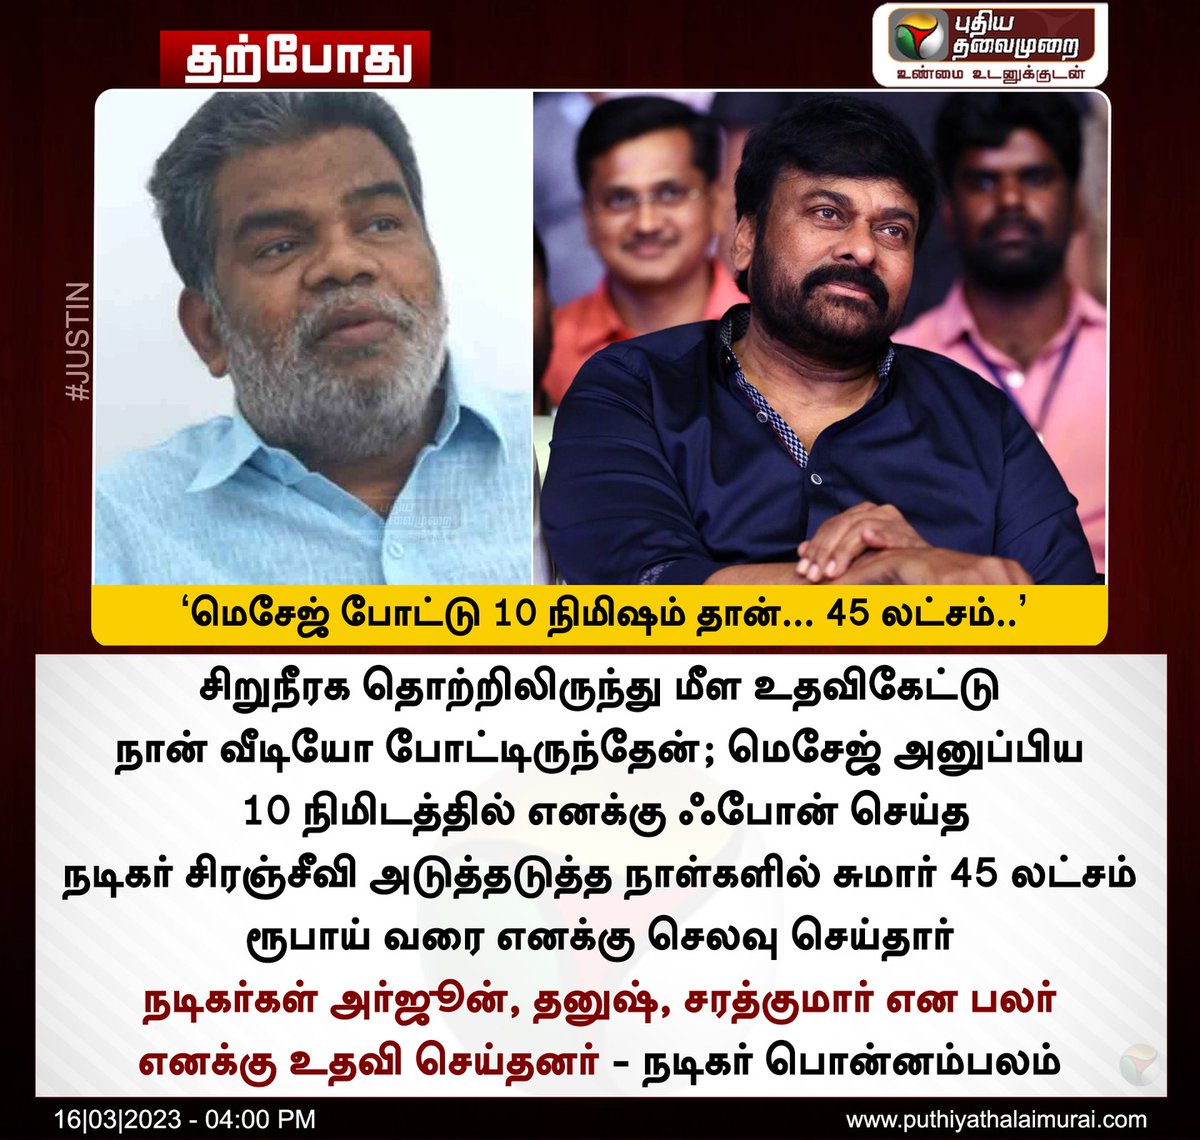 I Texted #Chiranjeevi For Help Within 10 Minutes He Called Me & Helped Me About 45 Lakhs Rupees Says Actor #Ponnambalam ! Before Trolling Him We Should Know About His Good Heart Too !